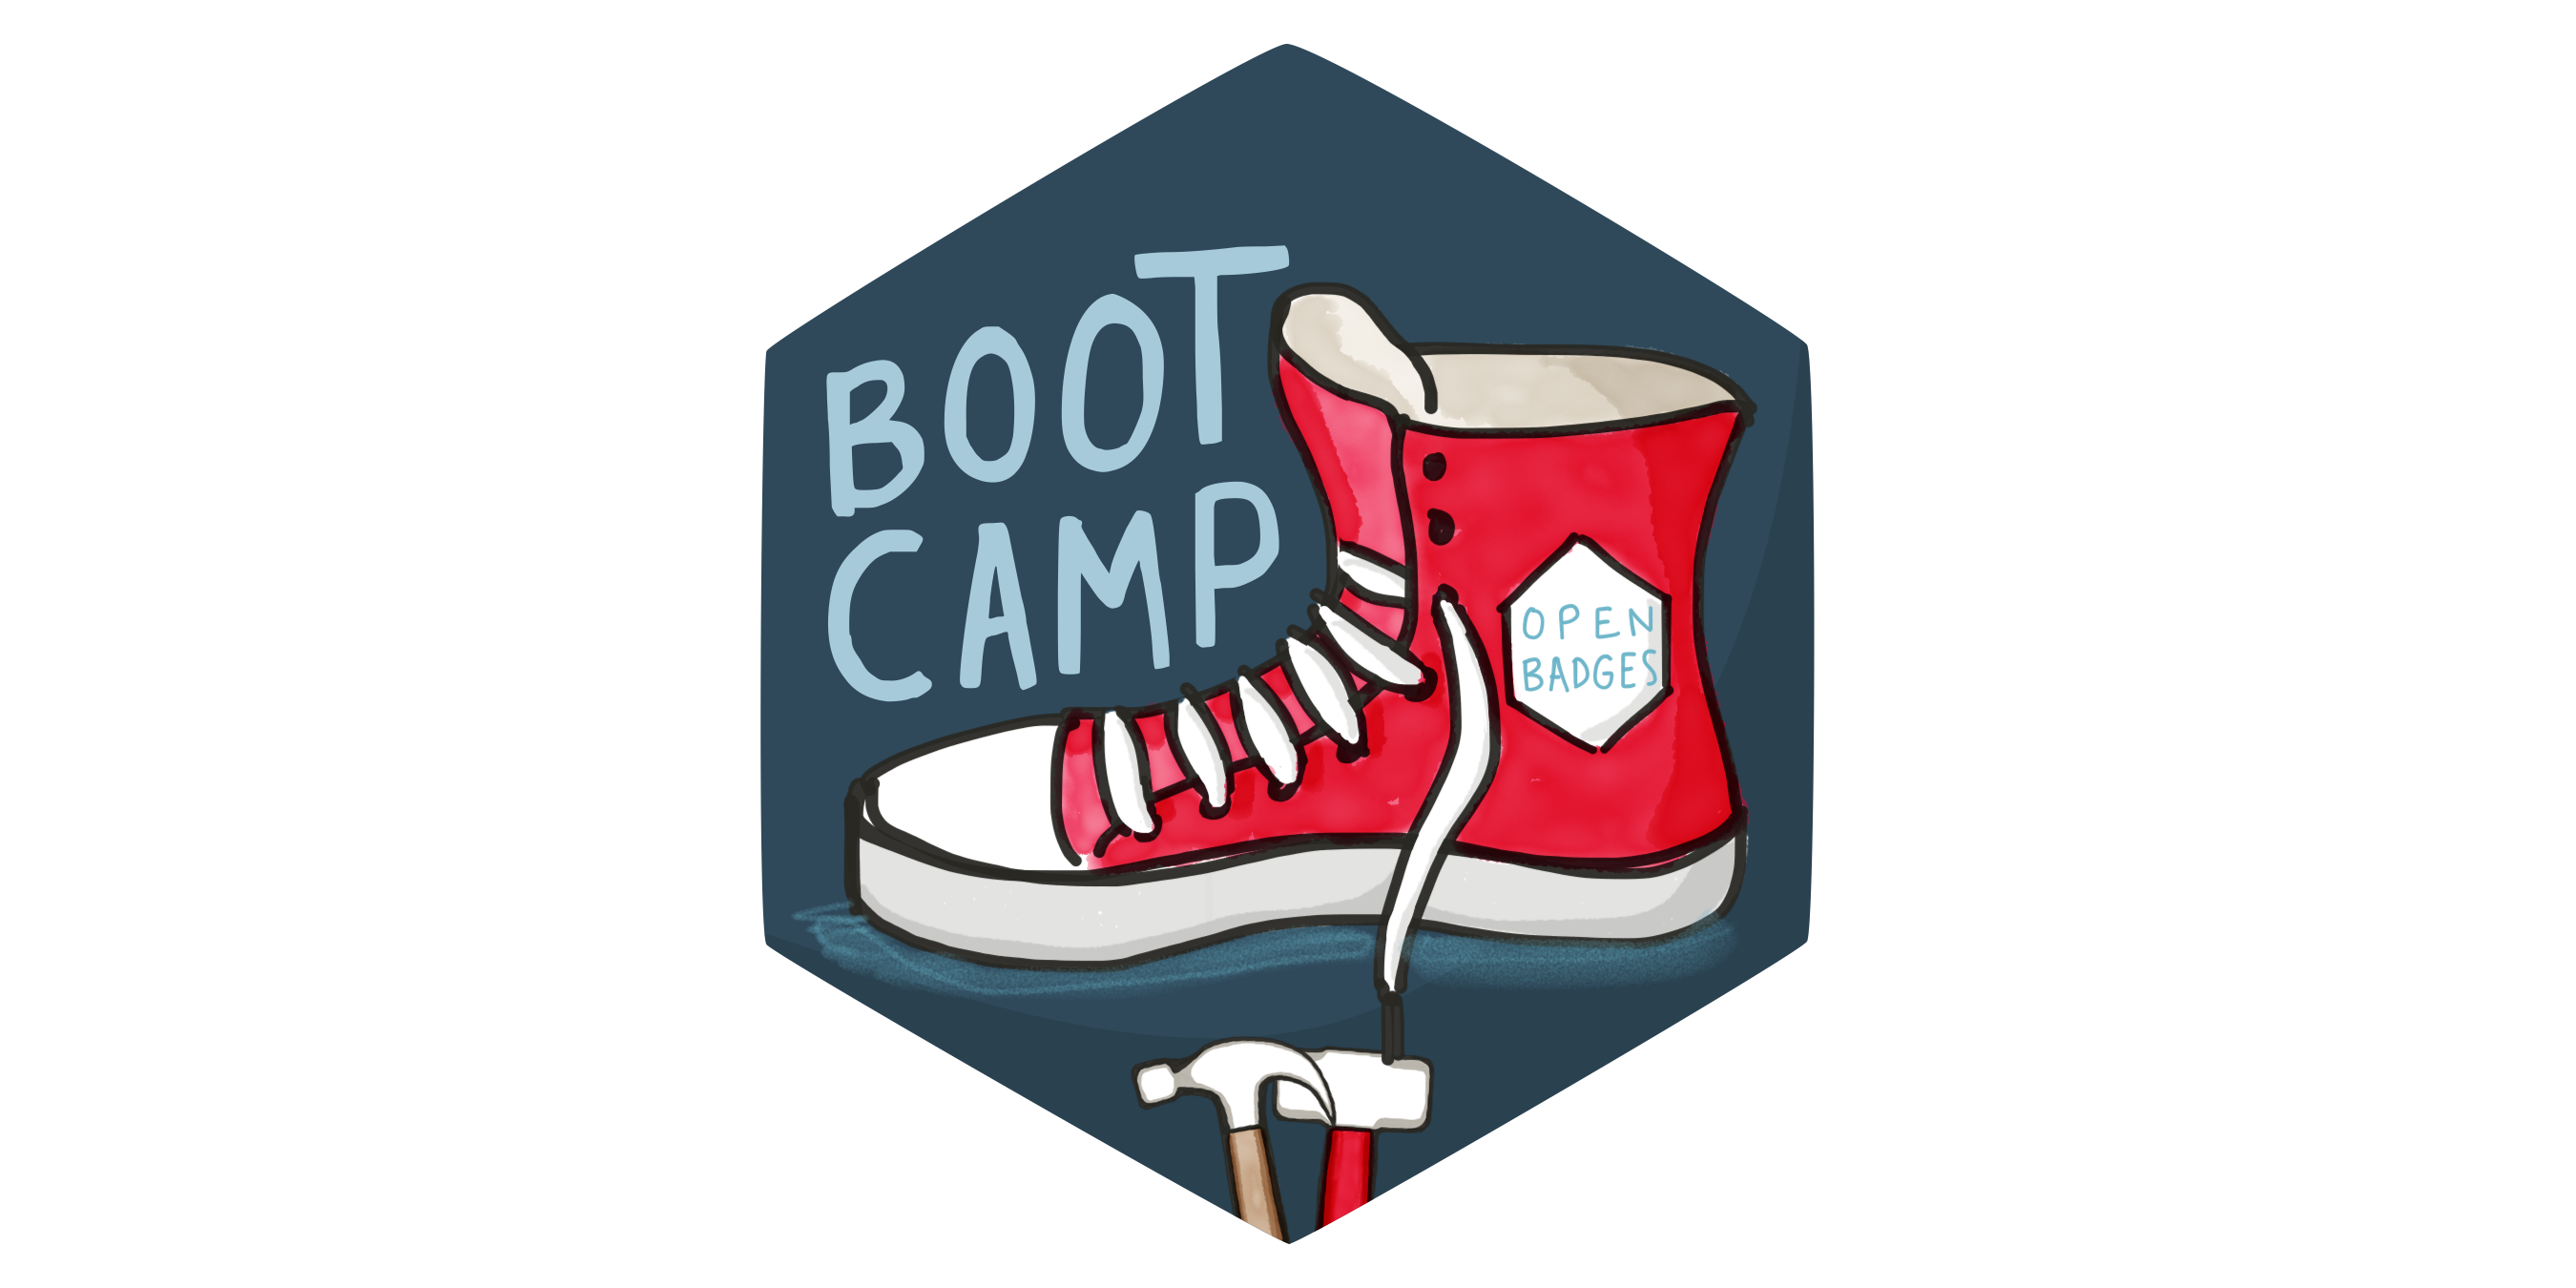 Join us in London on February 15th for BADGE BOOTCAMP!